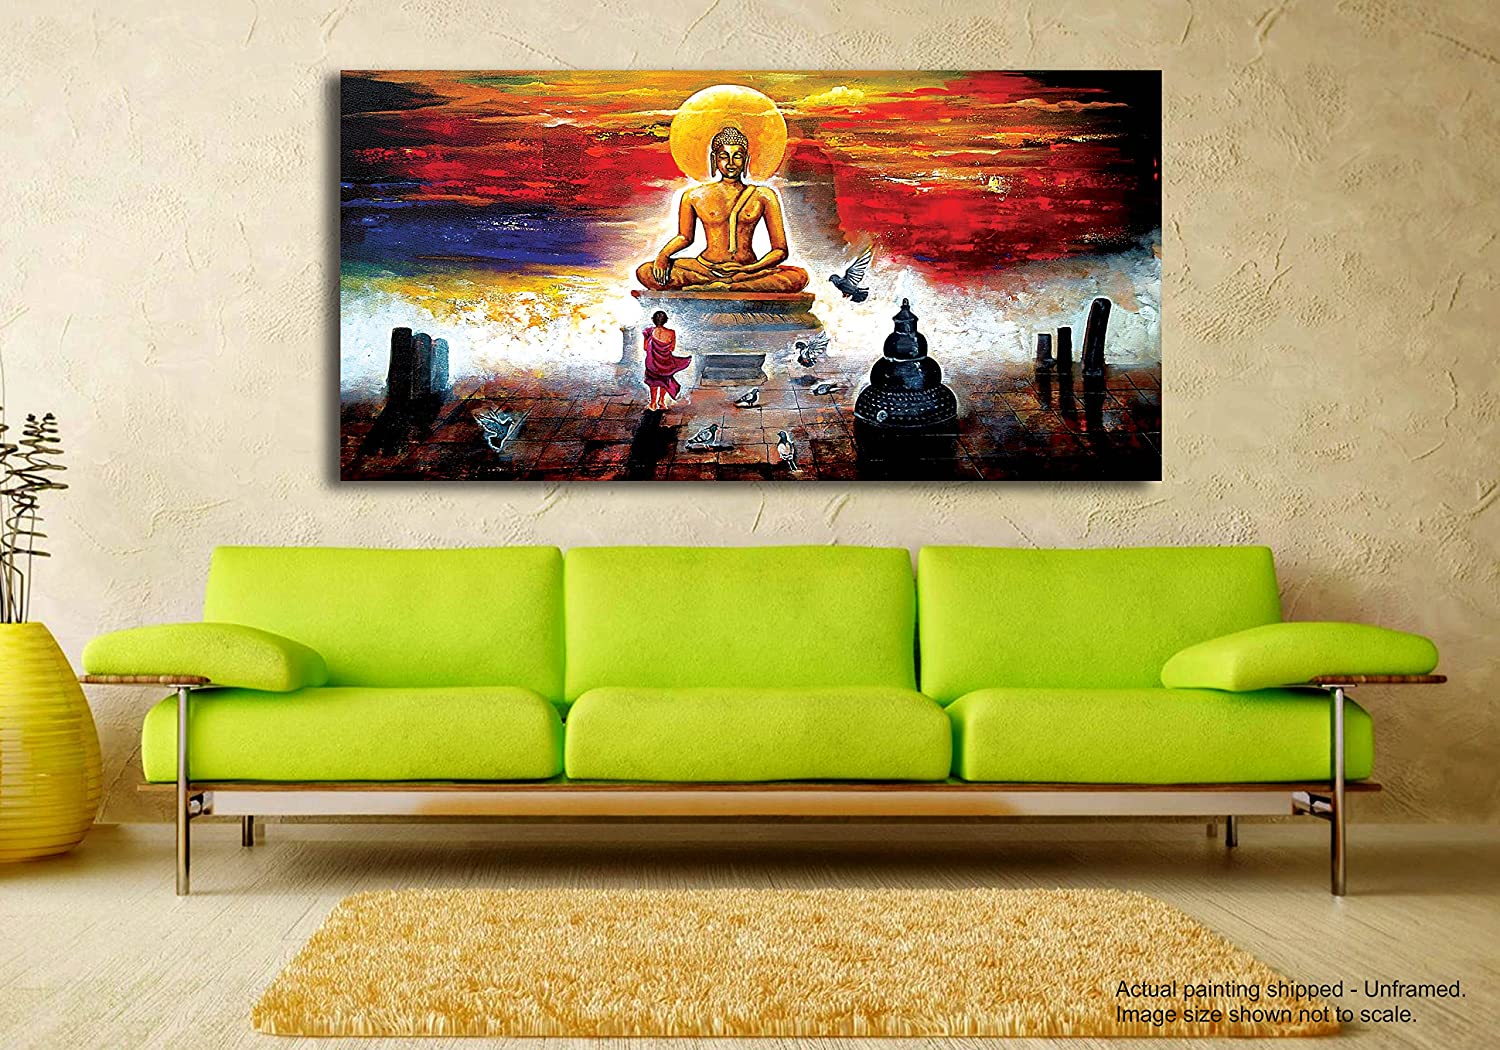 Tamatina Canvas Painting - in Search of Divine Buddha - Paintings ...